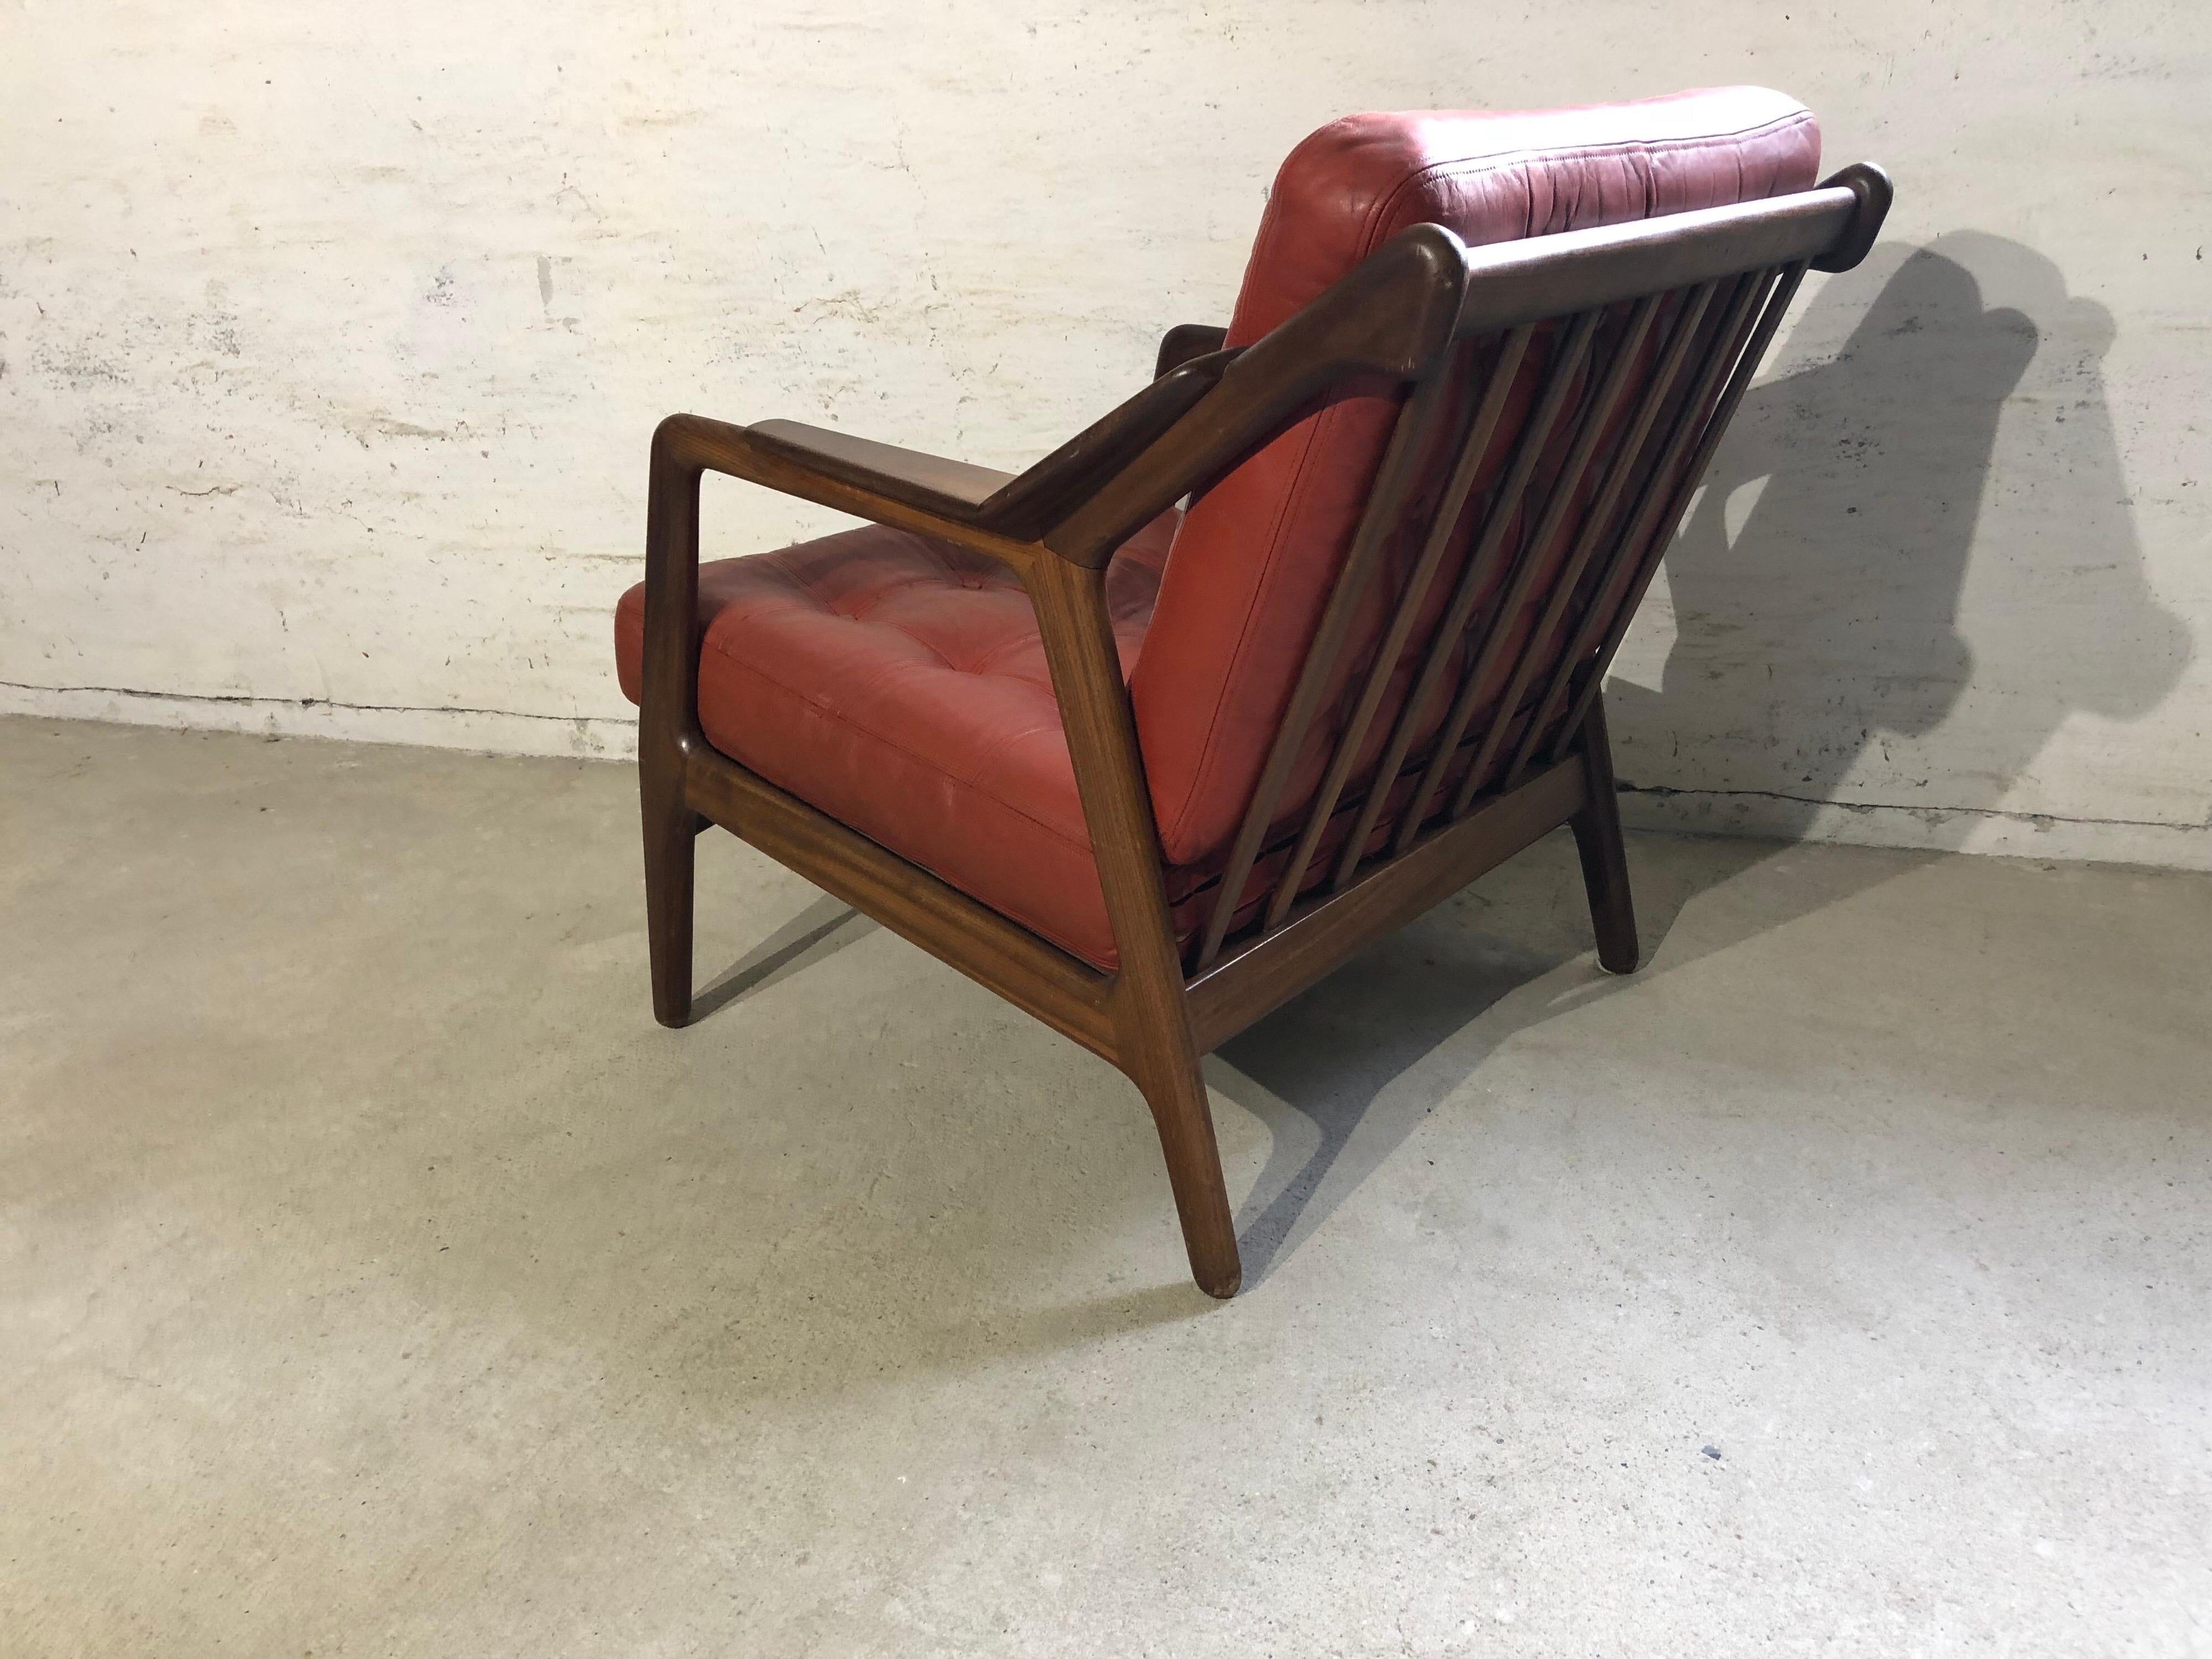 H. Brockmann Petersen Loungechair, with red leather upholstery, wooden frame is made in teak. A stunning Mid-Century Modern piece. 
The chair is in a good condition.